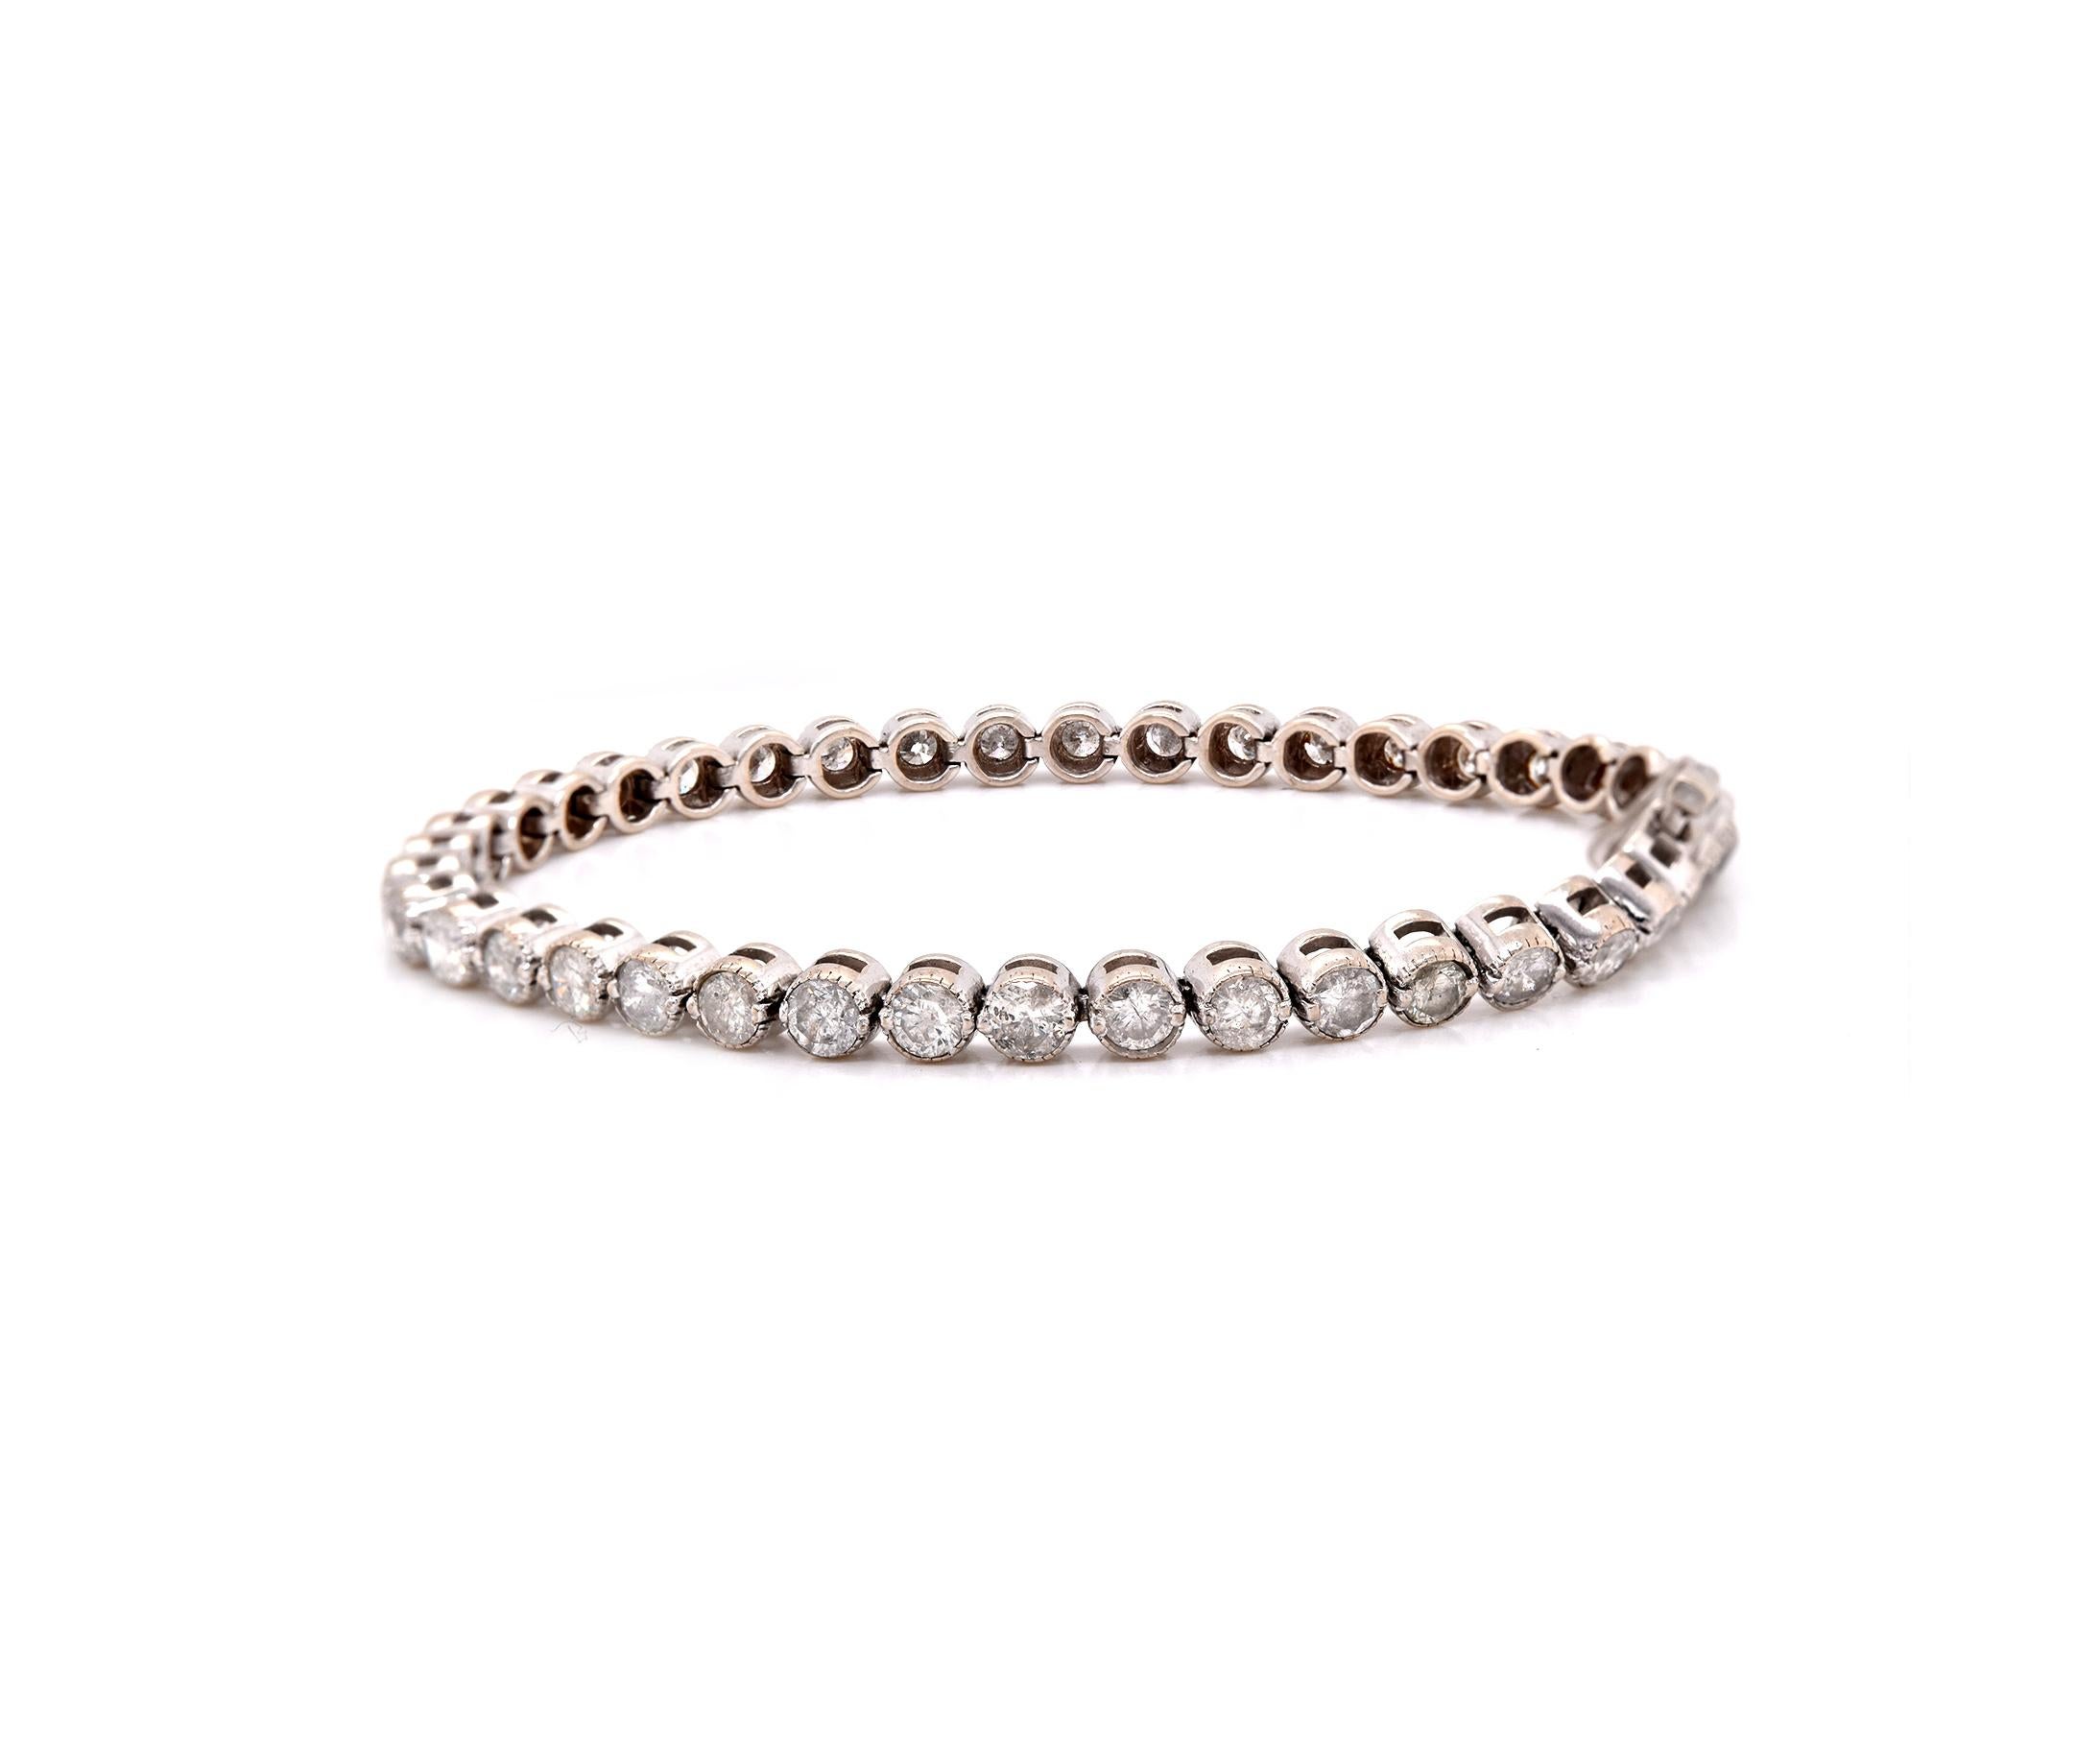 Designer: Custom Designed
Material: 14k white gold
Round Diamonds: 40 round brilliant cuts = 5.00cttw
Color: I
Clarity: SI1-SI2
Dimensions: the bracelet measures 6 ¾  inches in length and 4.10mm in width
Weight: 12.62 grams
